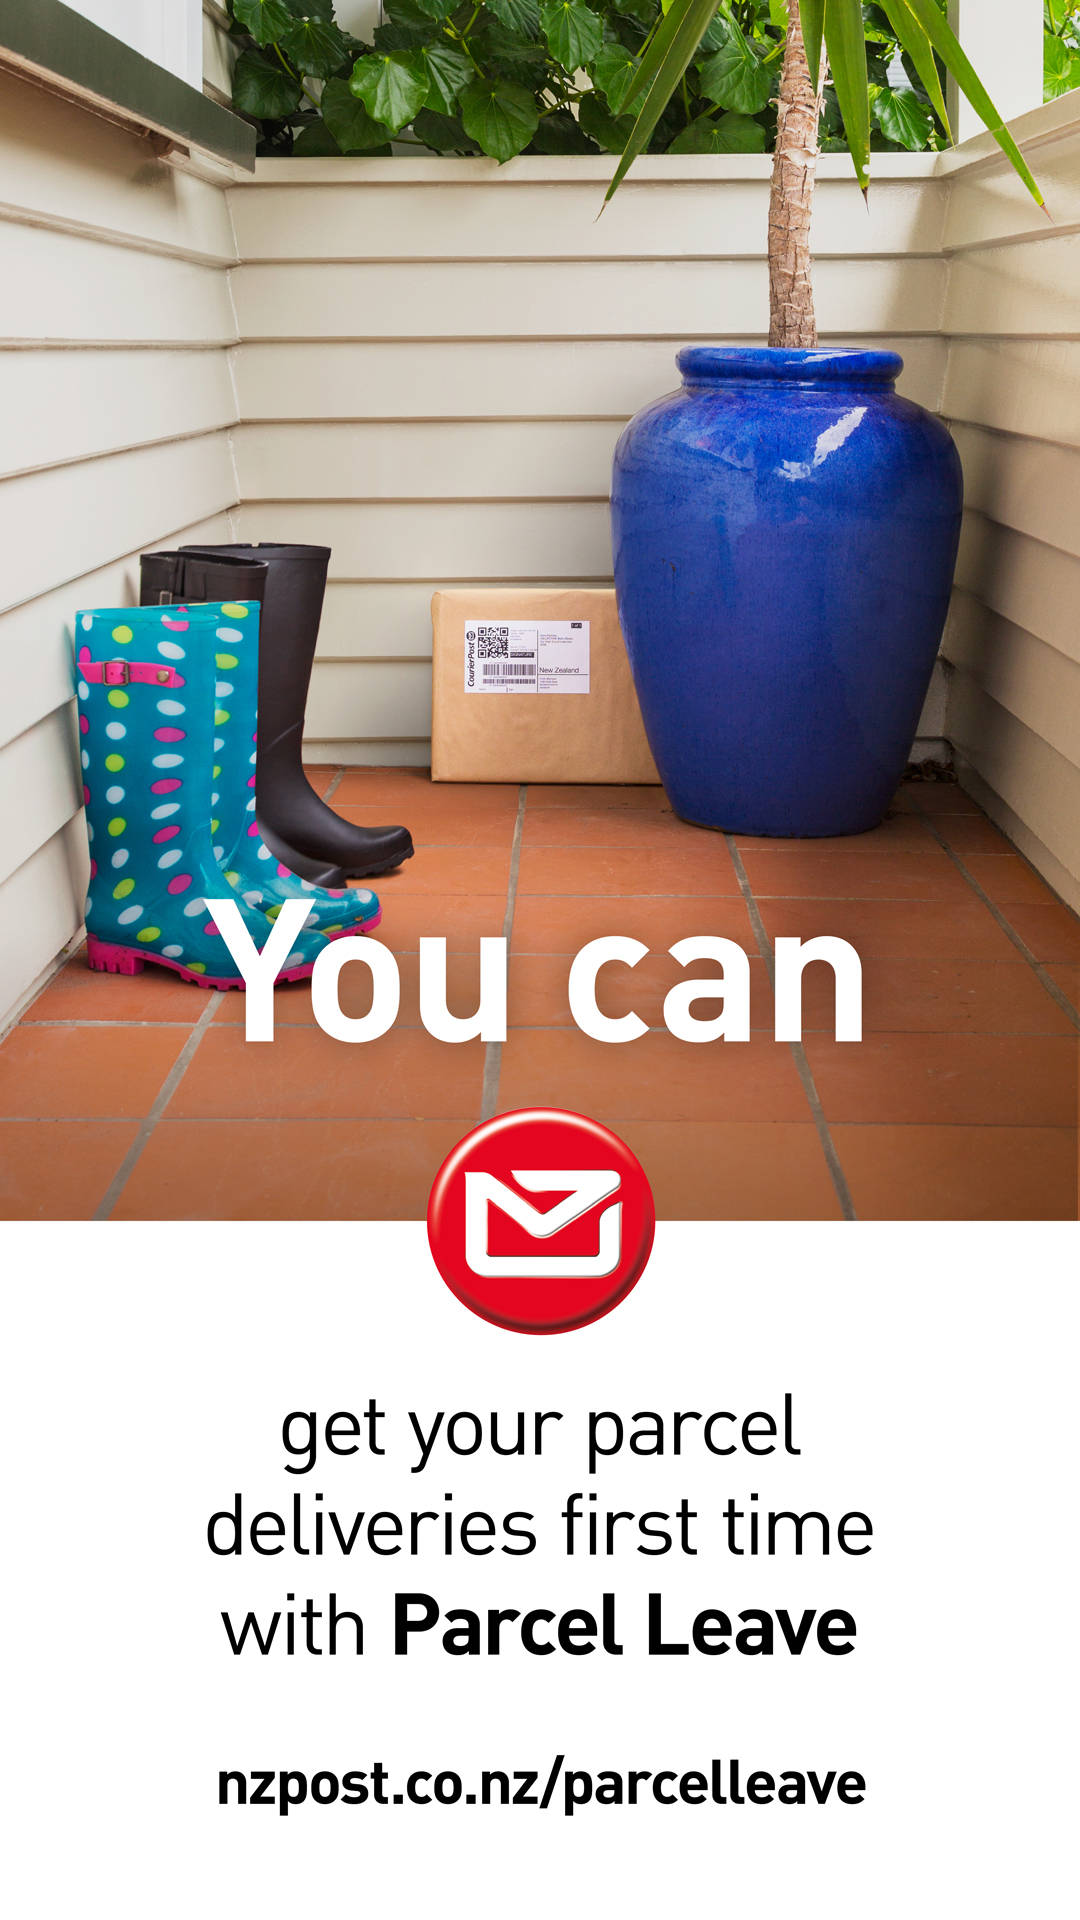 0890-PST-Parcel-Leave_May_1080x1920_0.2_MM.jpg